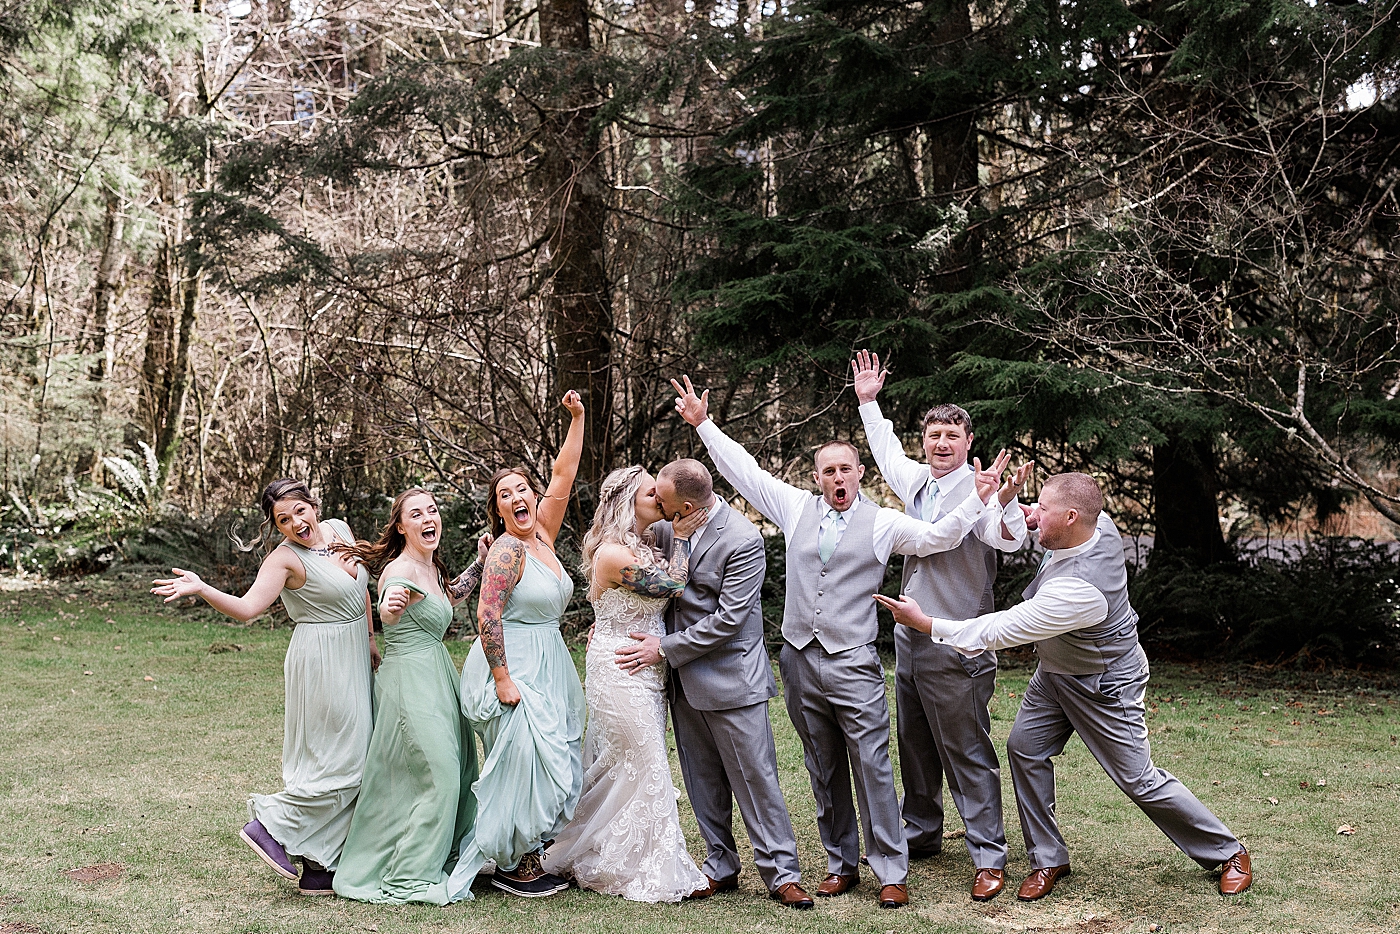 Wedding party with bride and groom. Photo by Megan Montalvo Photography.